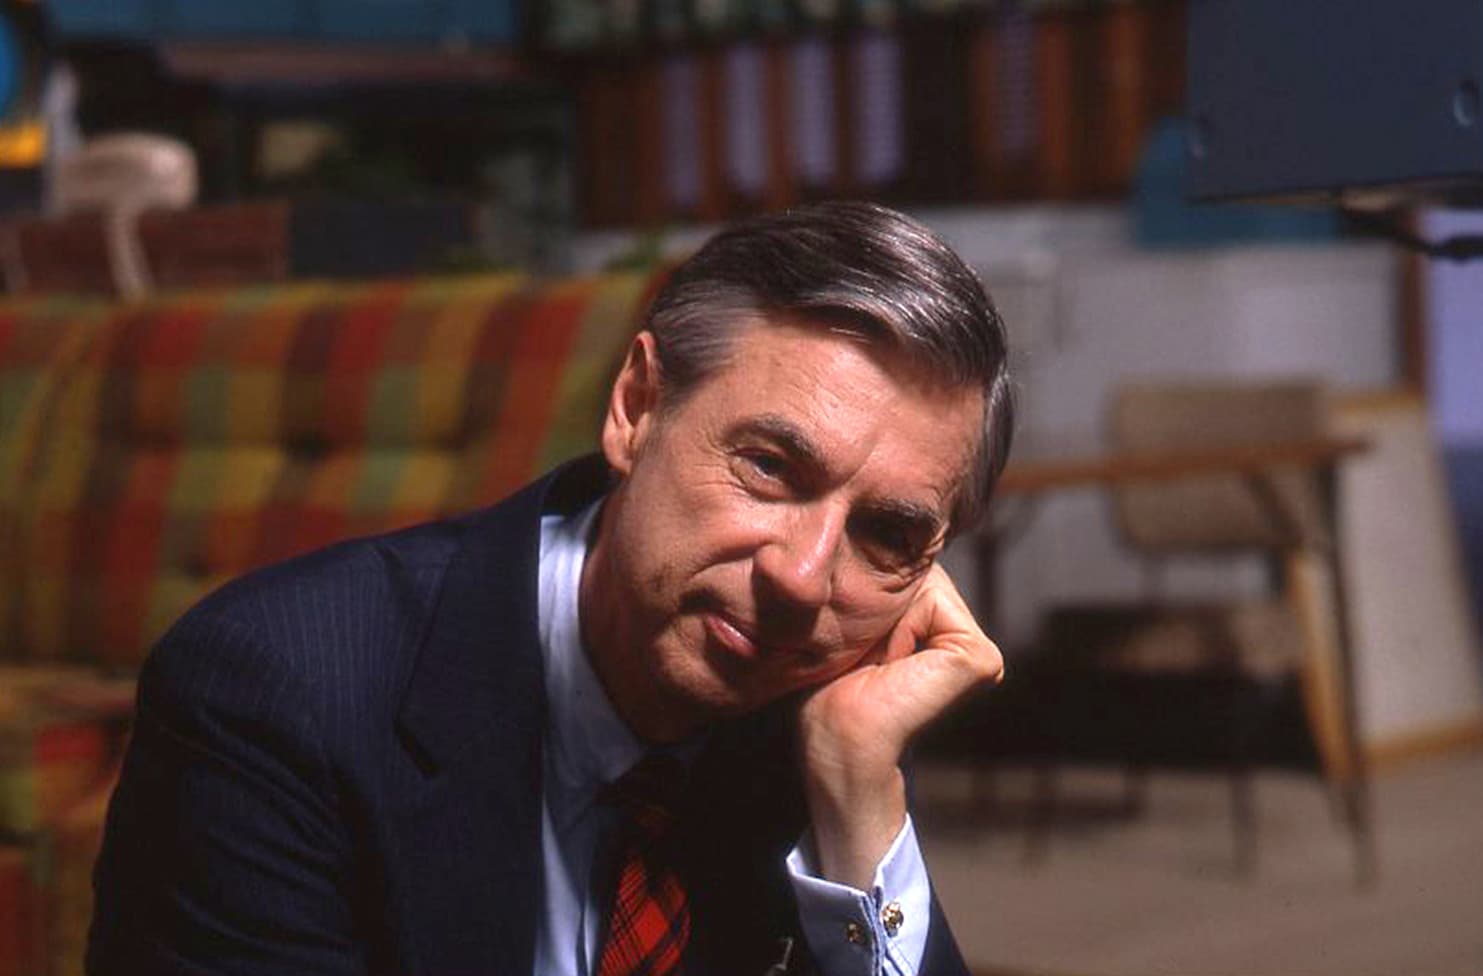 Fred Rogers on the set of his show, &quot;Mister Rogers Neighborhood.&quot; (Courtesy Jim Judkis/Focus Features)